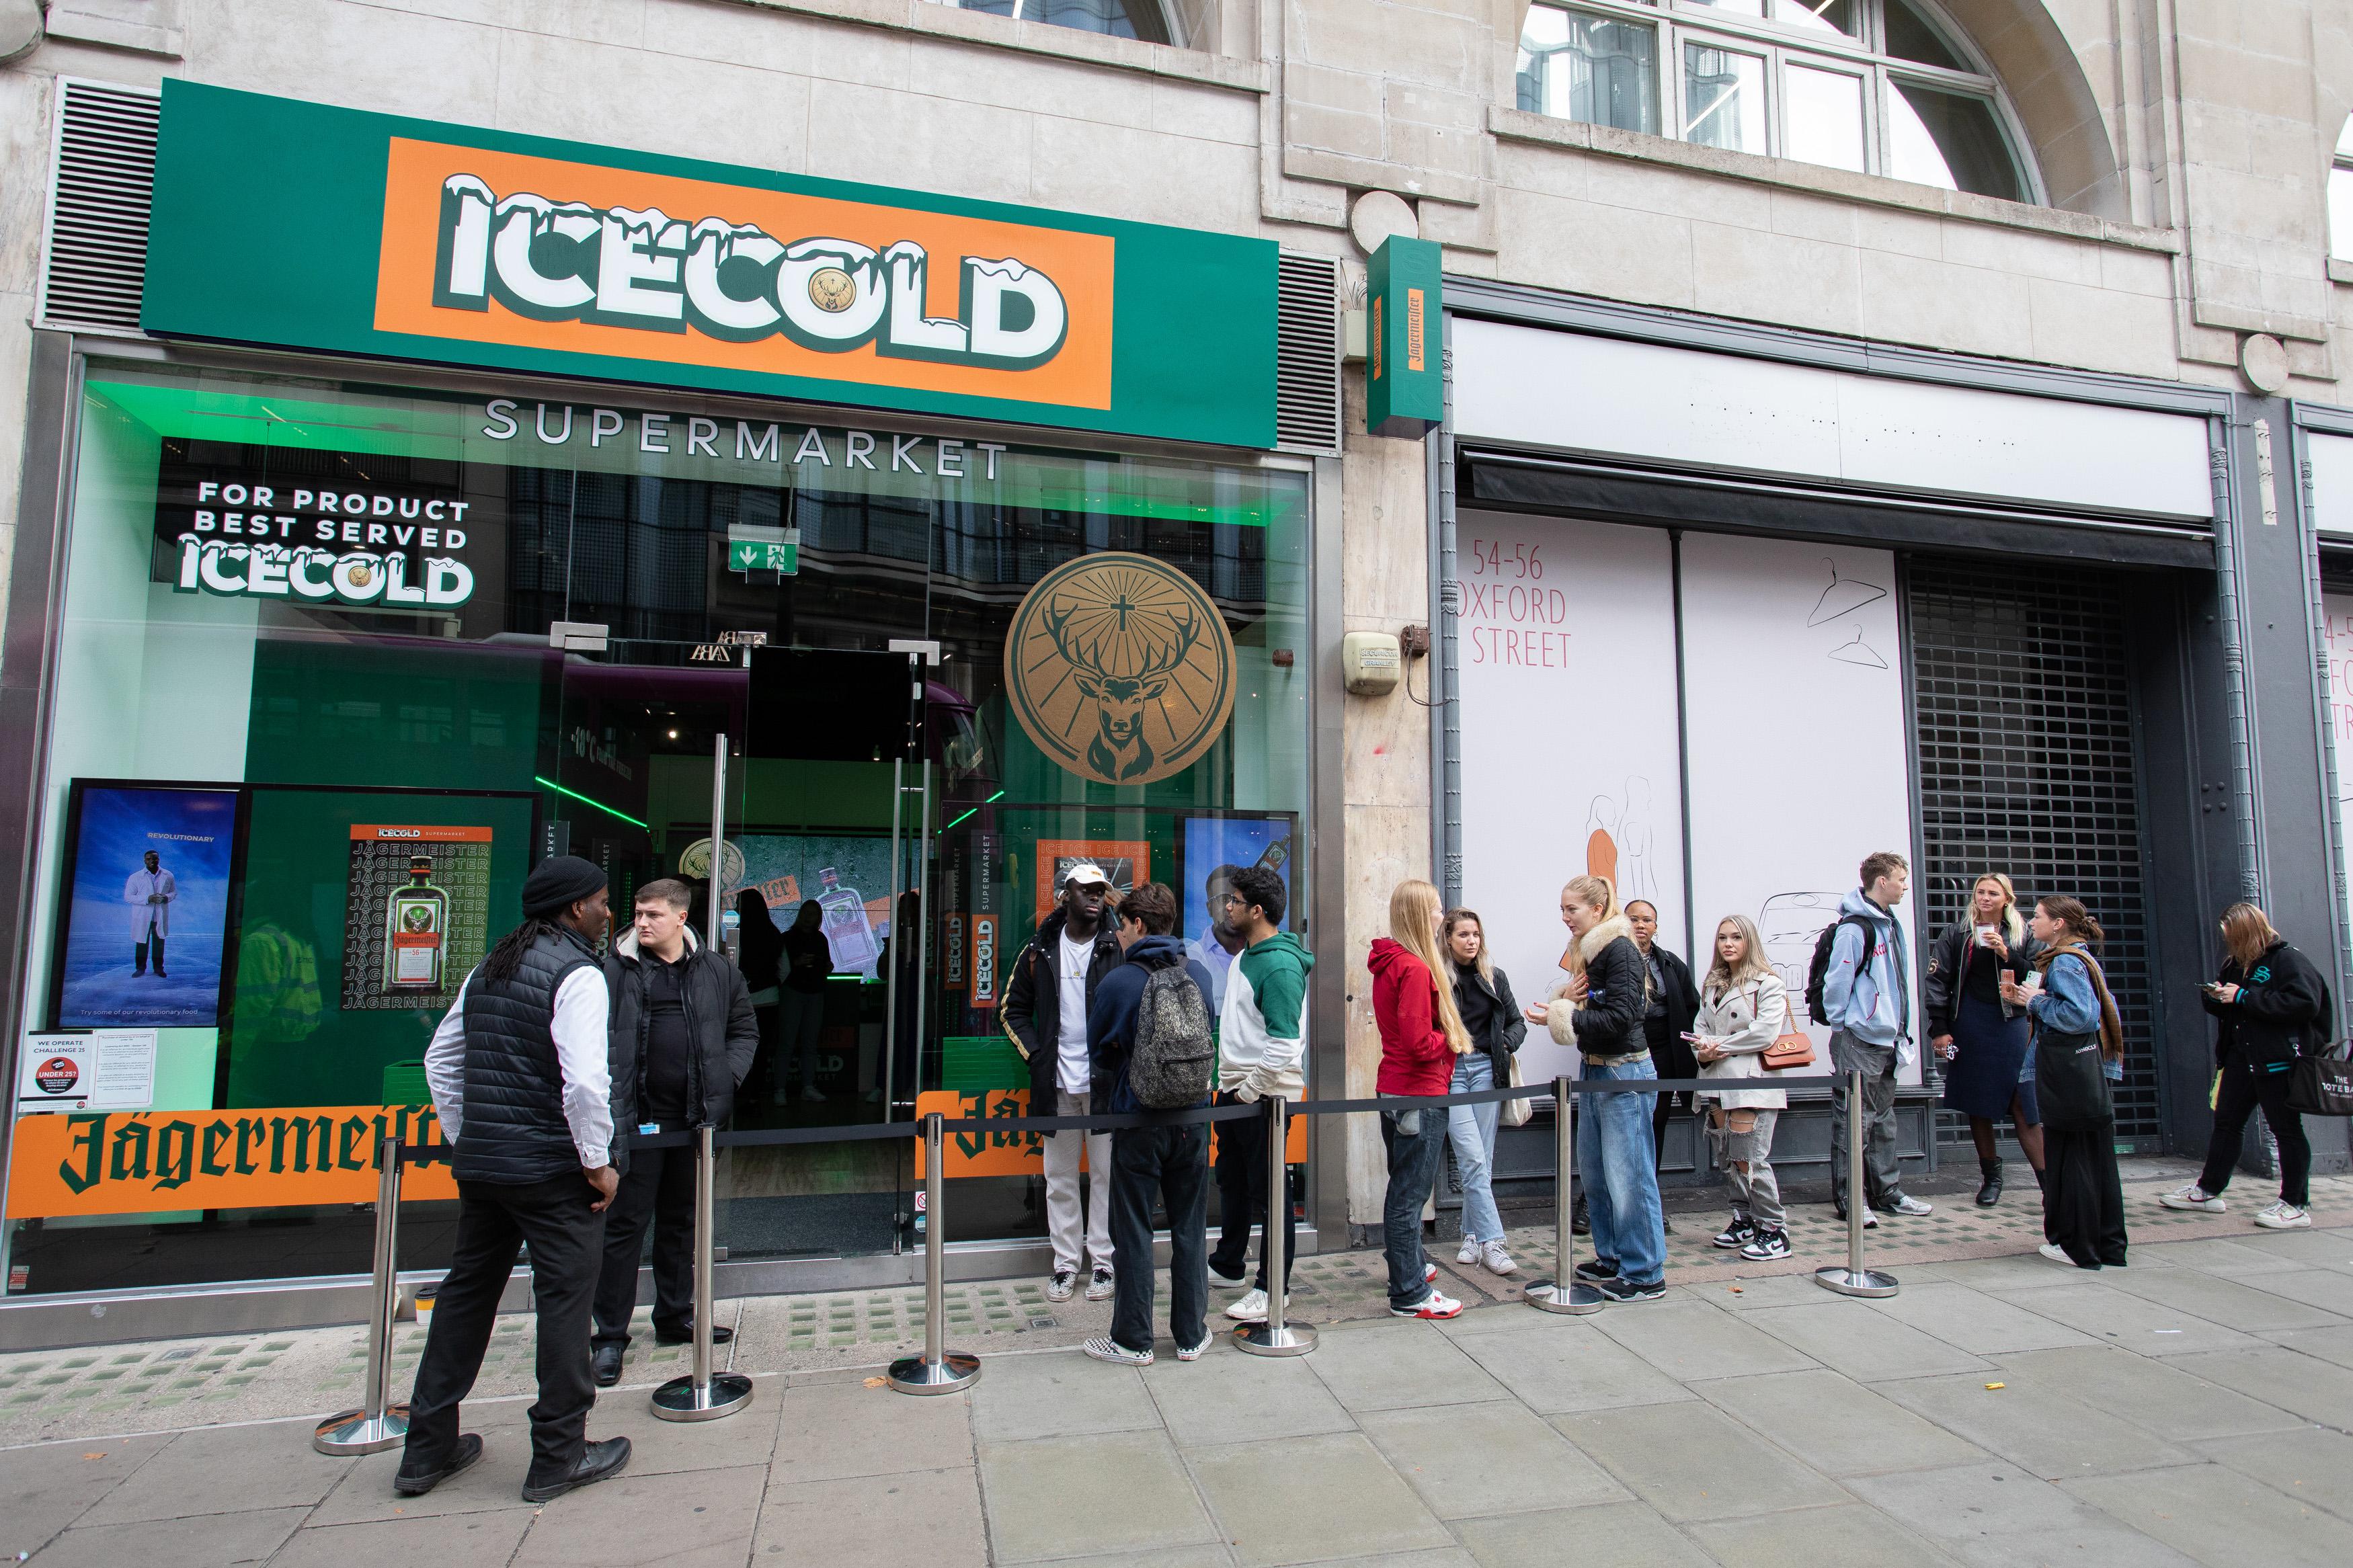 Queue outside Sook Space on Oxford street during Jagermeister pop up